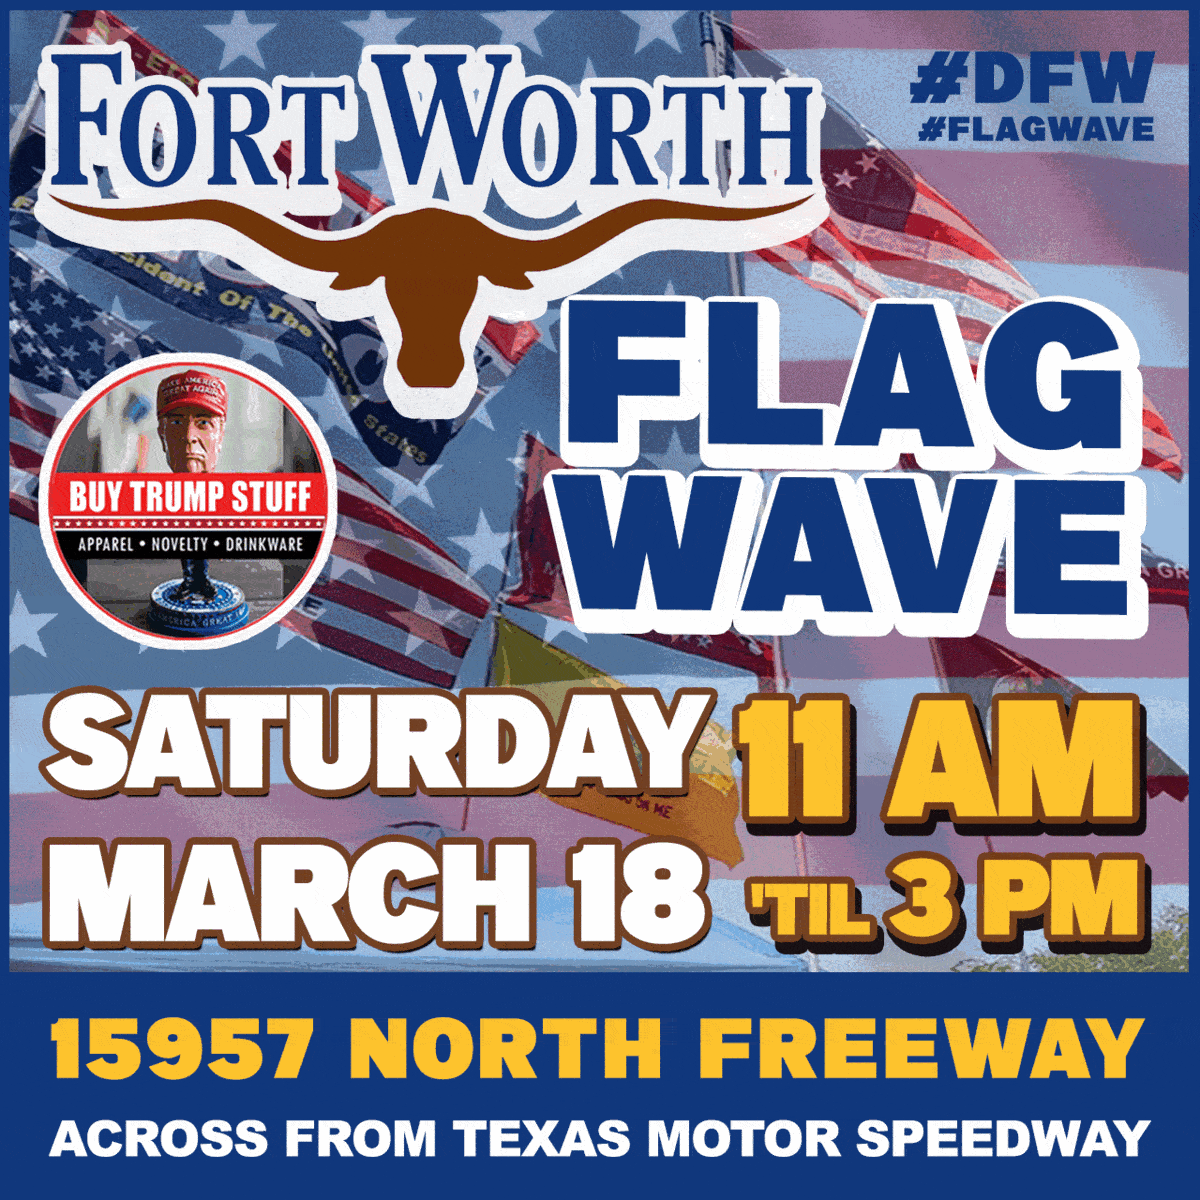 #DFW Ft. Worth, TX: Saturday, March 18th, 2023 FLAG WAVE 11am-3pm across from the Texas Motor Speedway